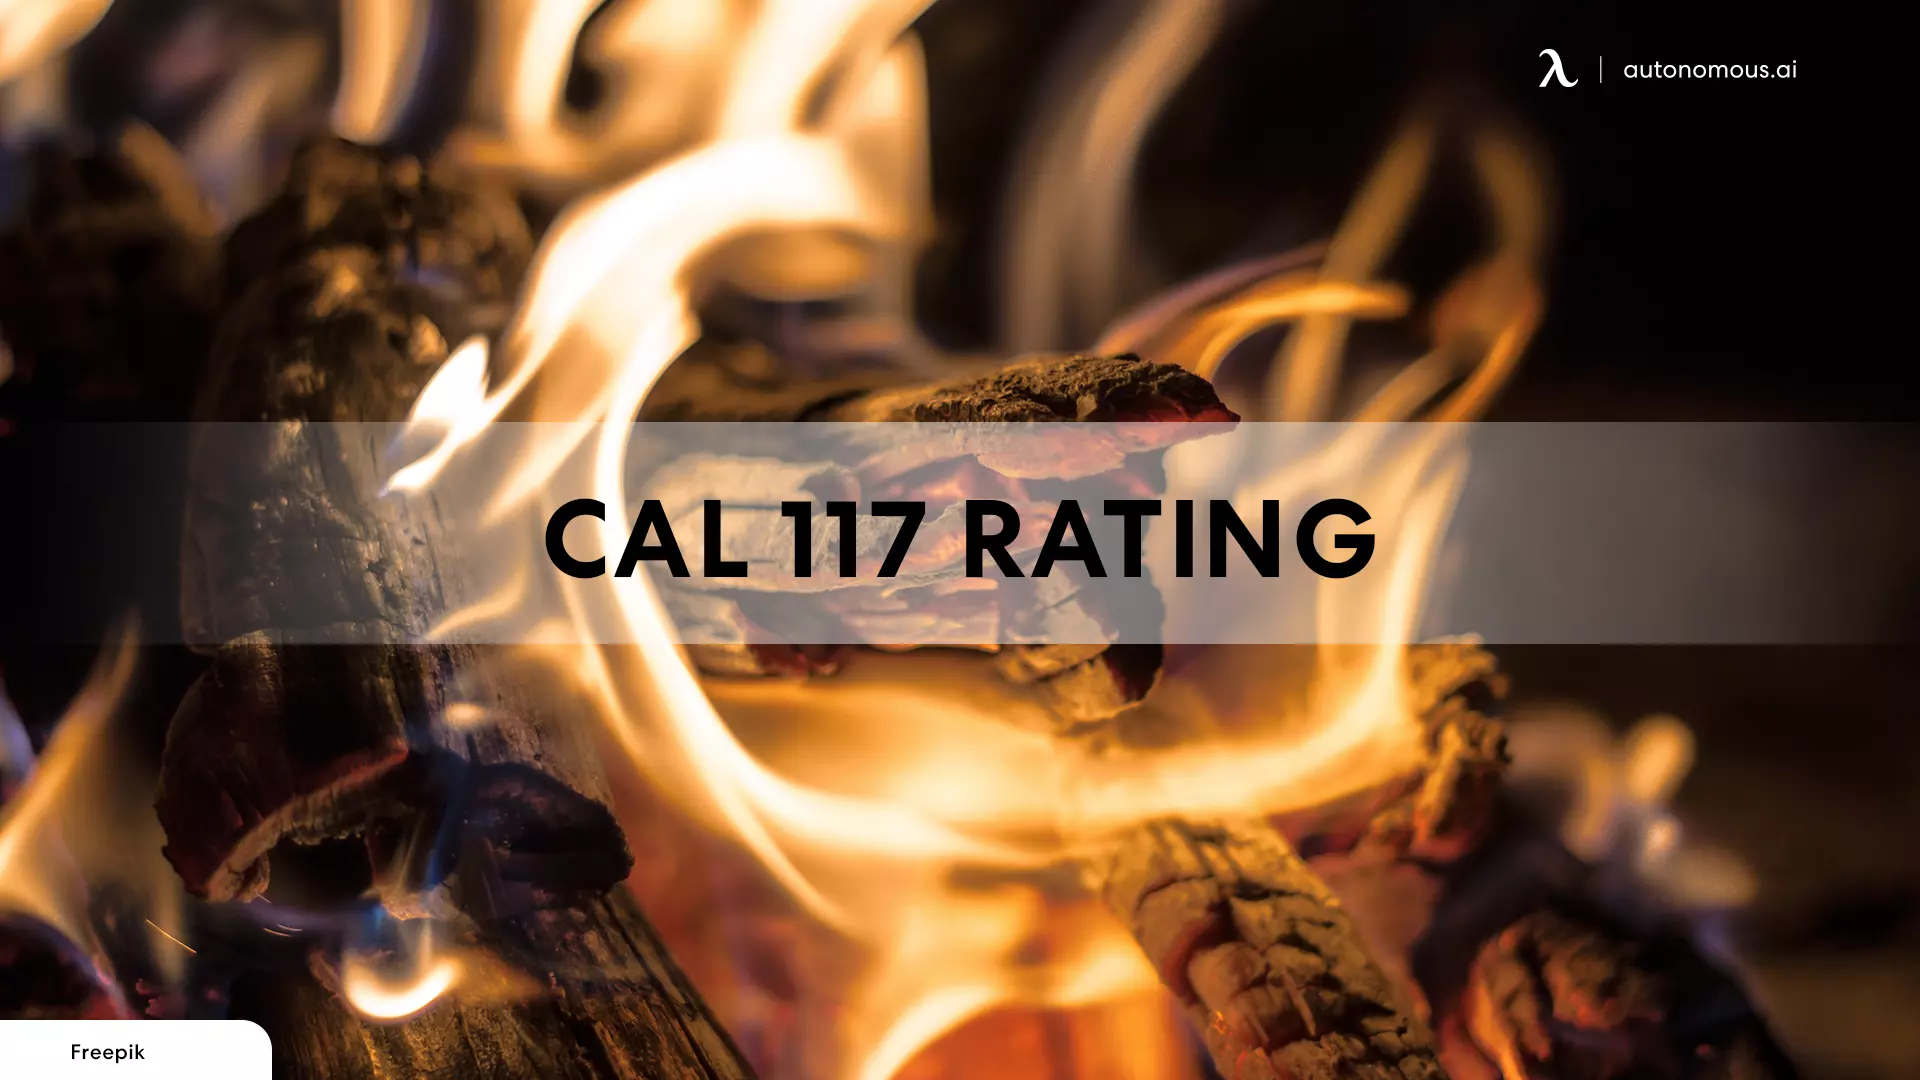 What is Cal 117 Rating?